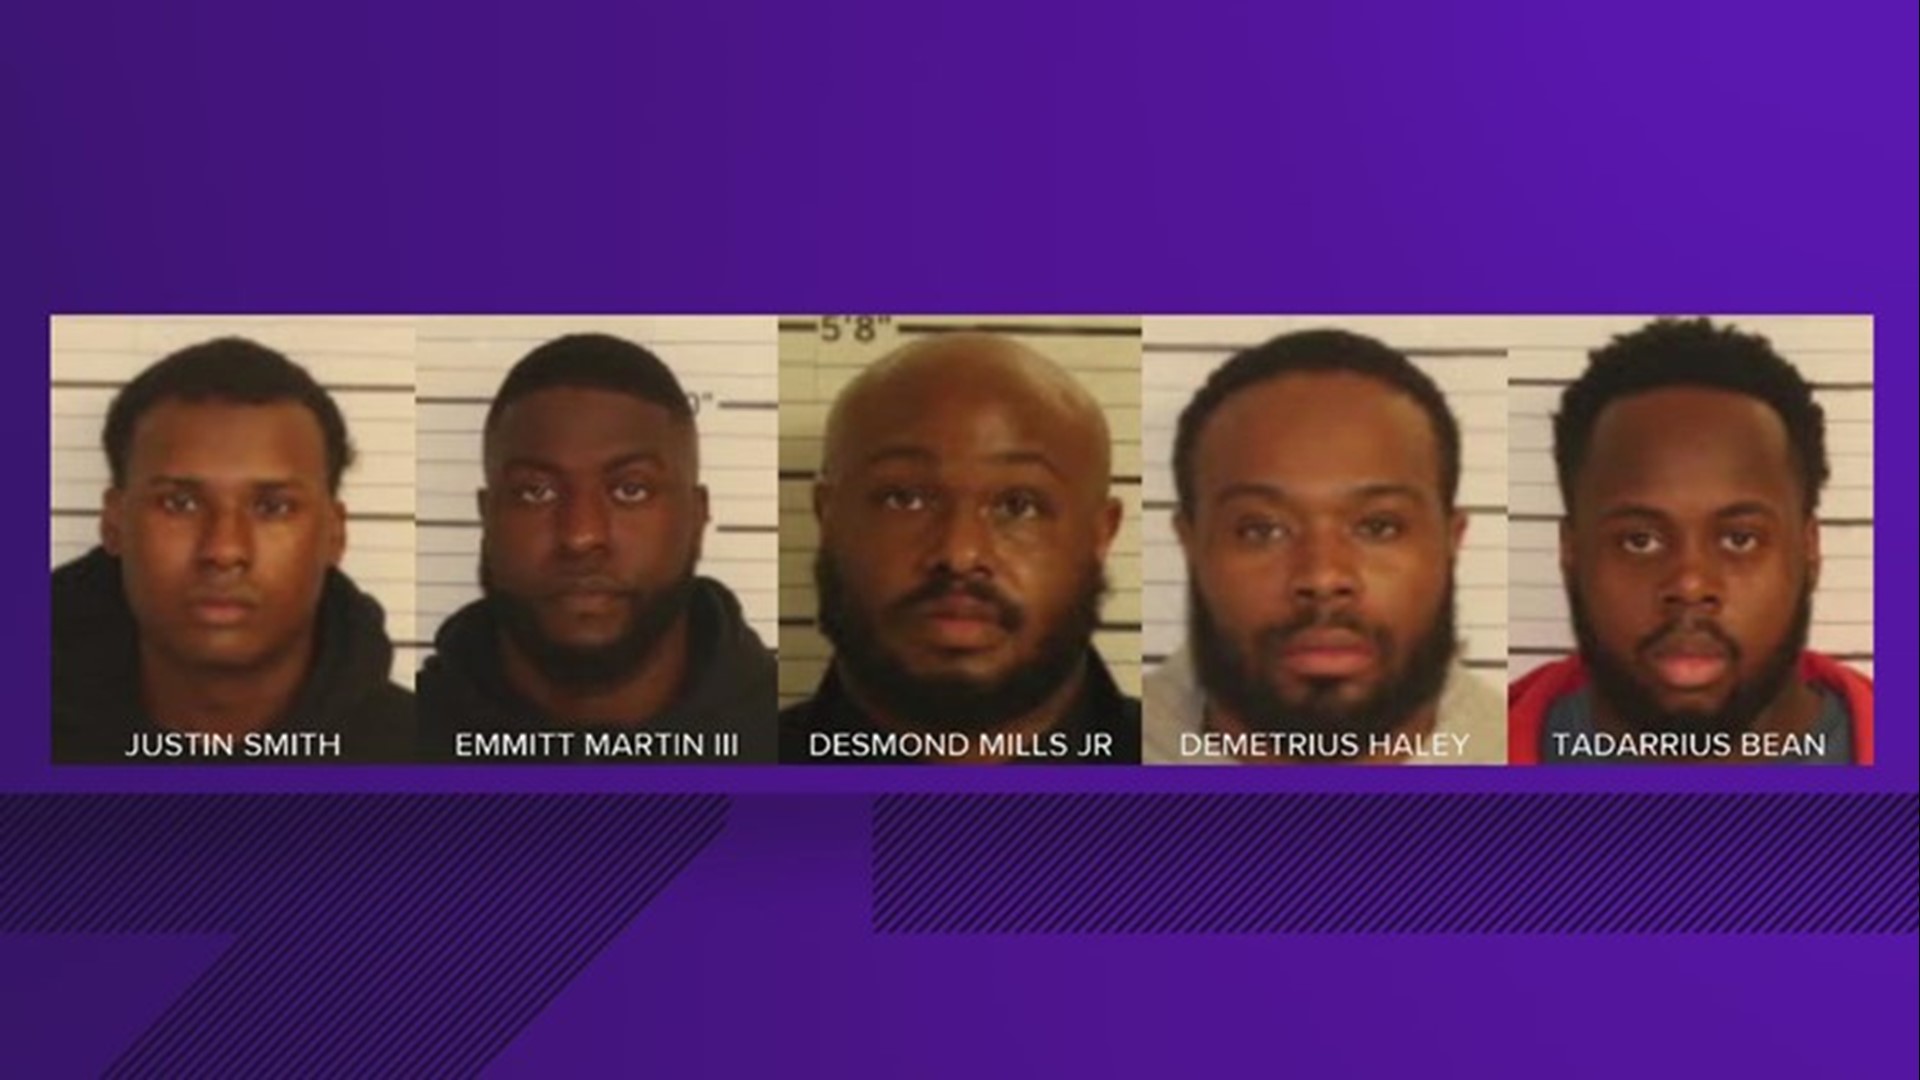 Three of the lawyers for the defendants argued that the trial should be separated. The judge said they would reconvene to hear a decision Oct. 5.